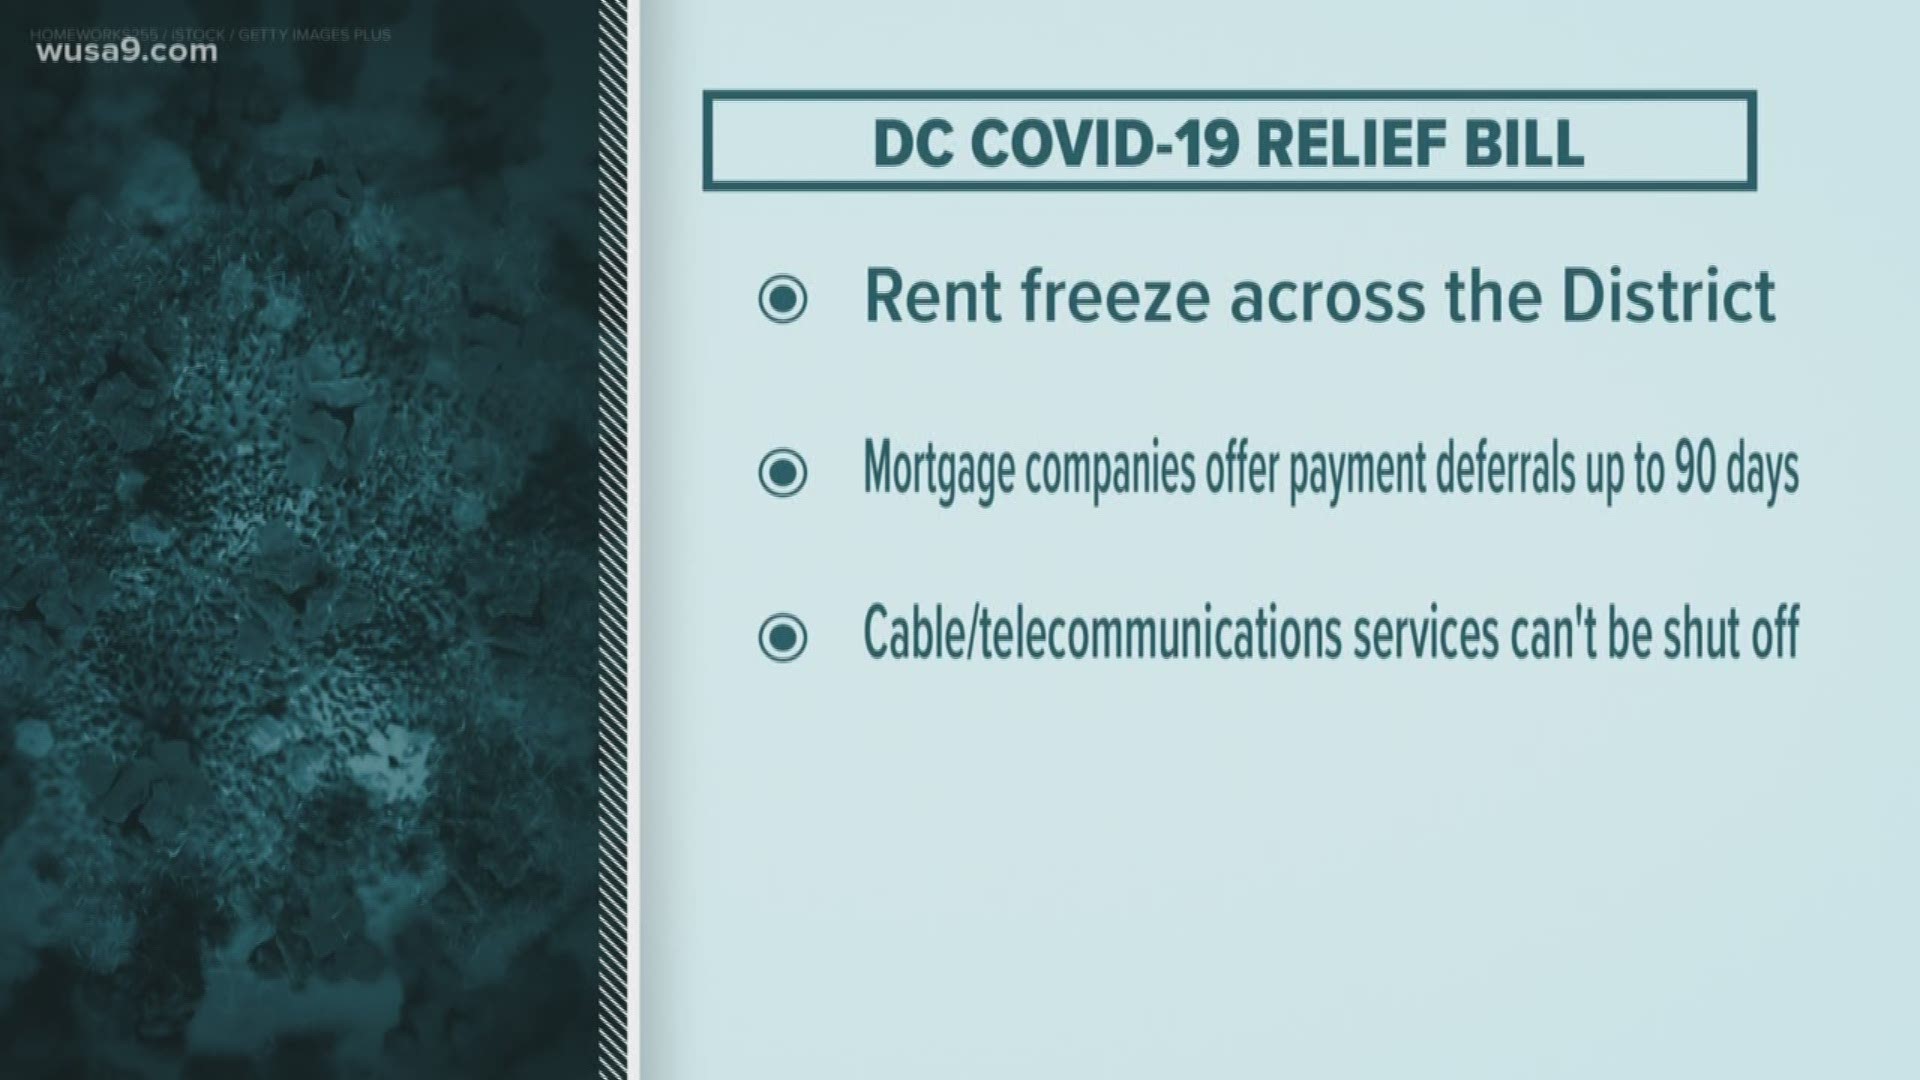 D.C. Council unanimously passed its second emergency COVID-19 relief bill, a measure that establishes a rent freeze and mortgage payment deferrals.